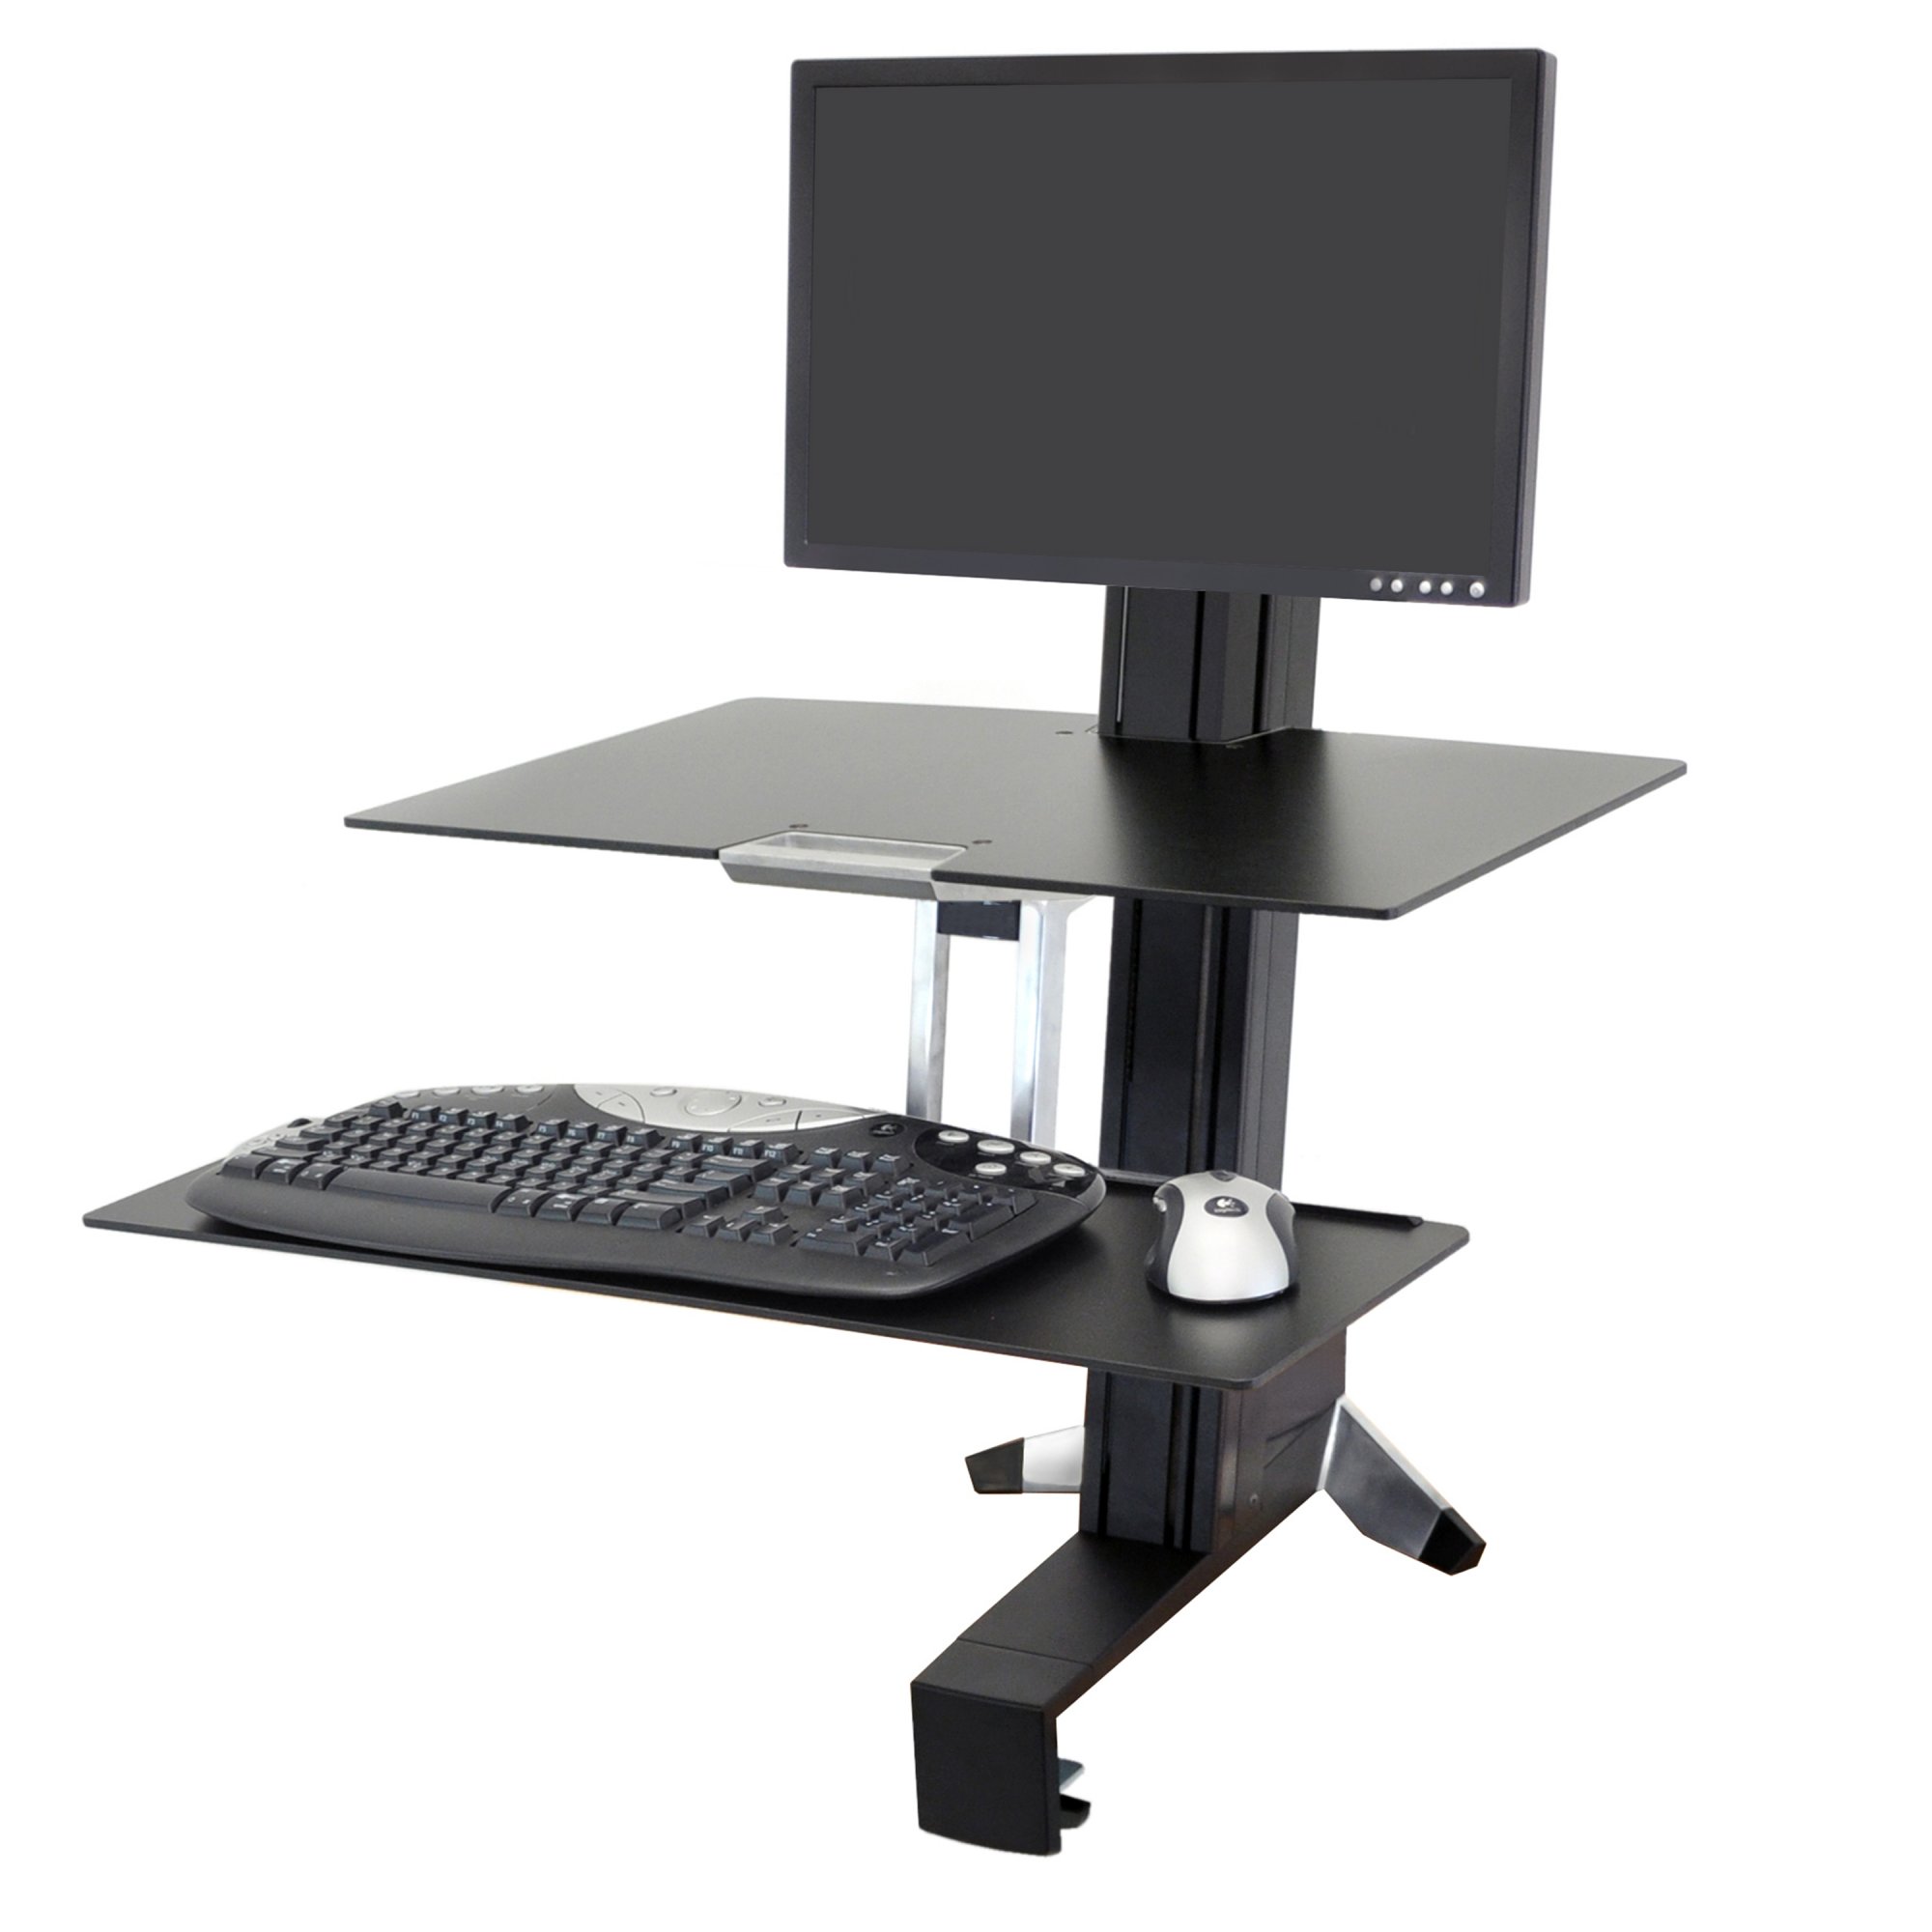 Ergotron 33-350-200 WorkFit-S, Single LD with Worksurface